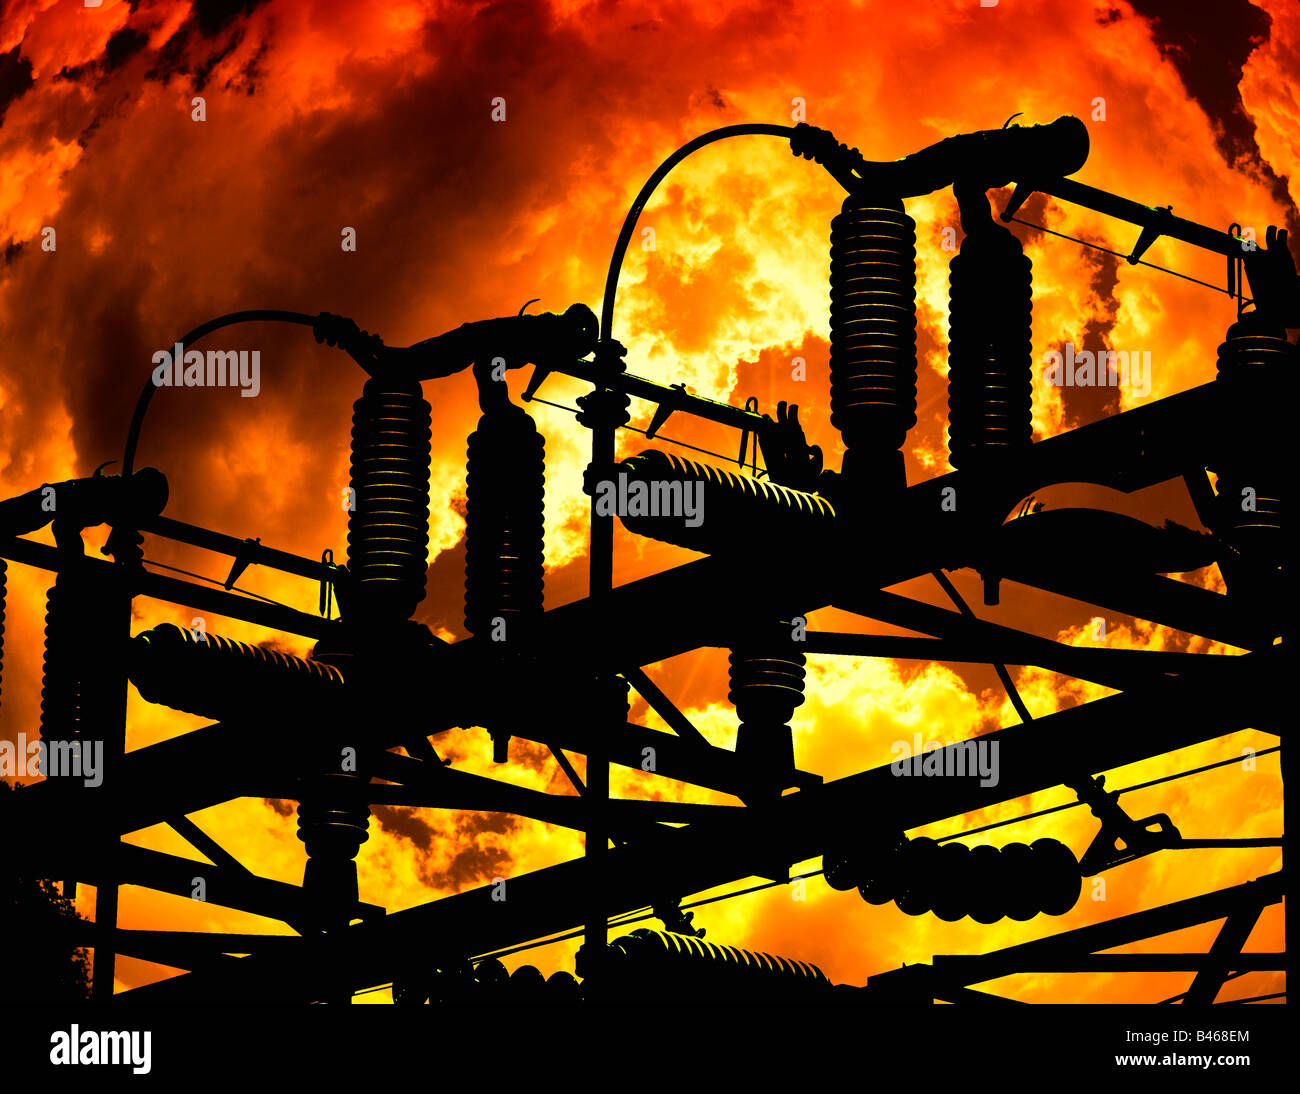 electric power substation silhouetted against large fire Stock Photo